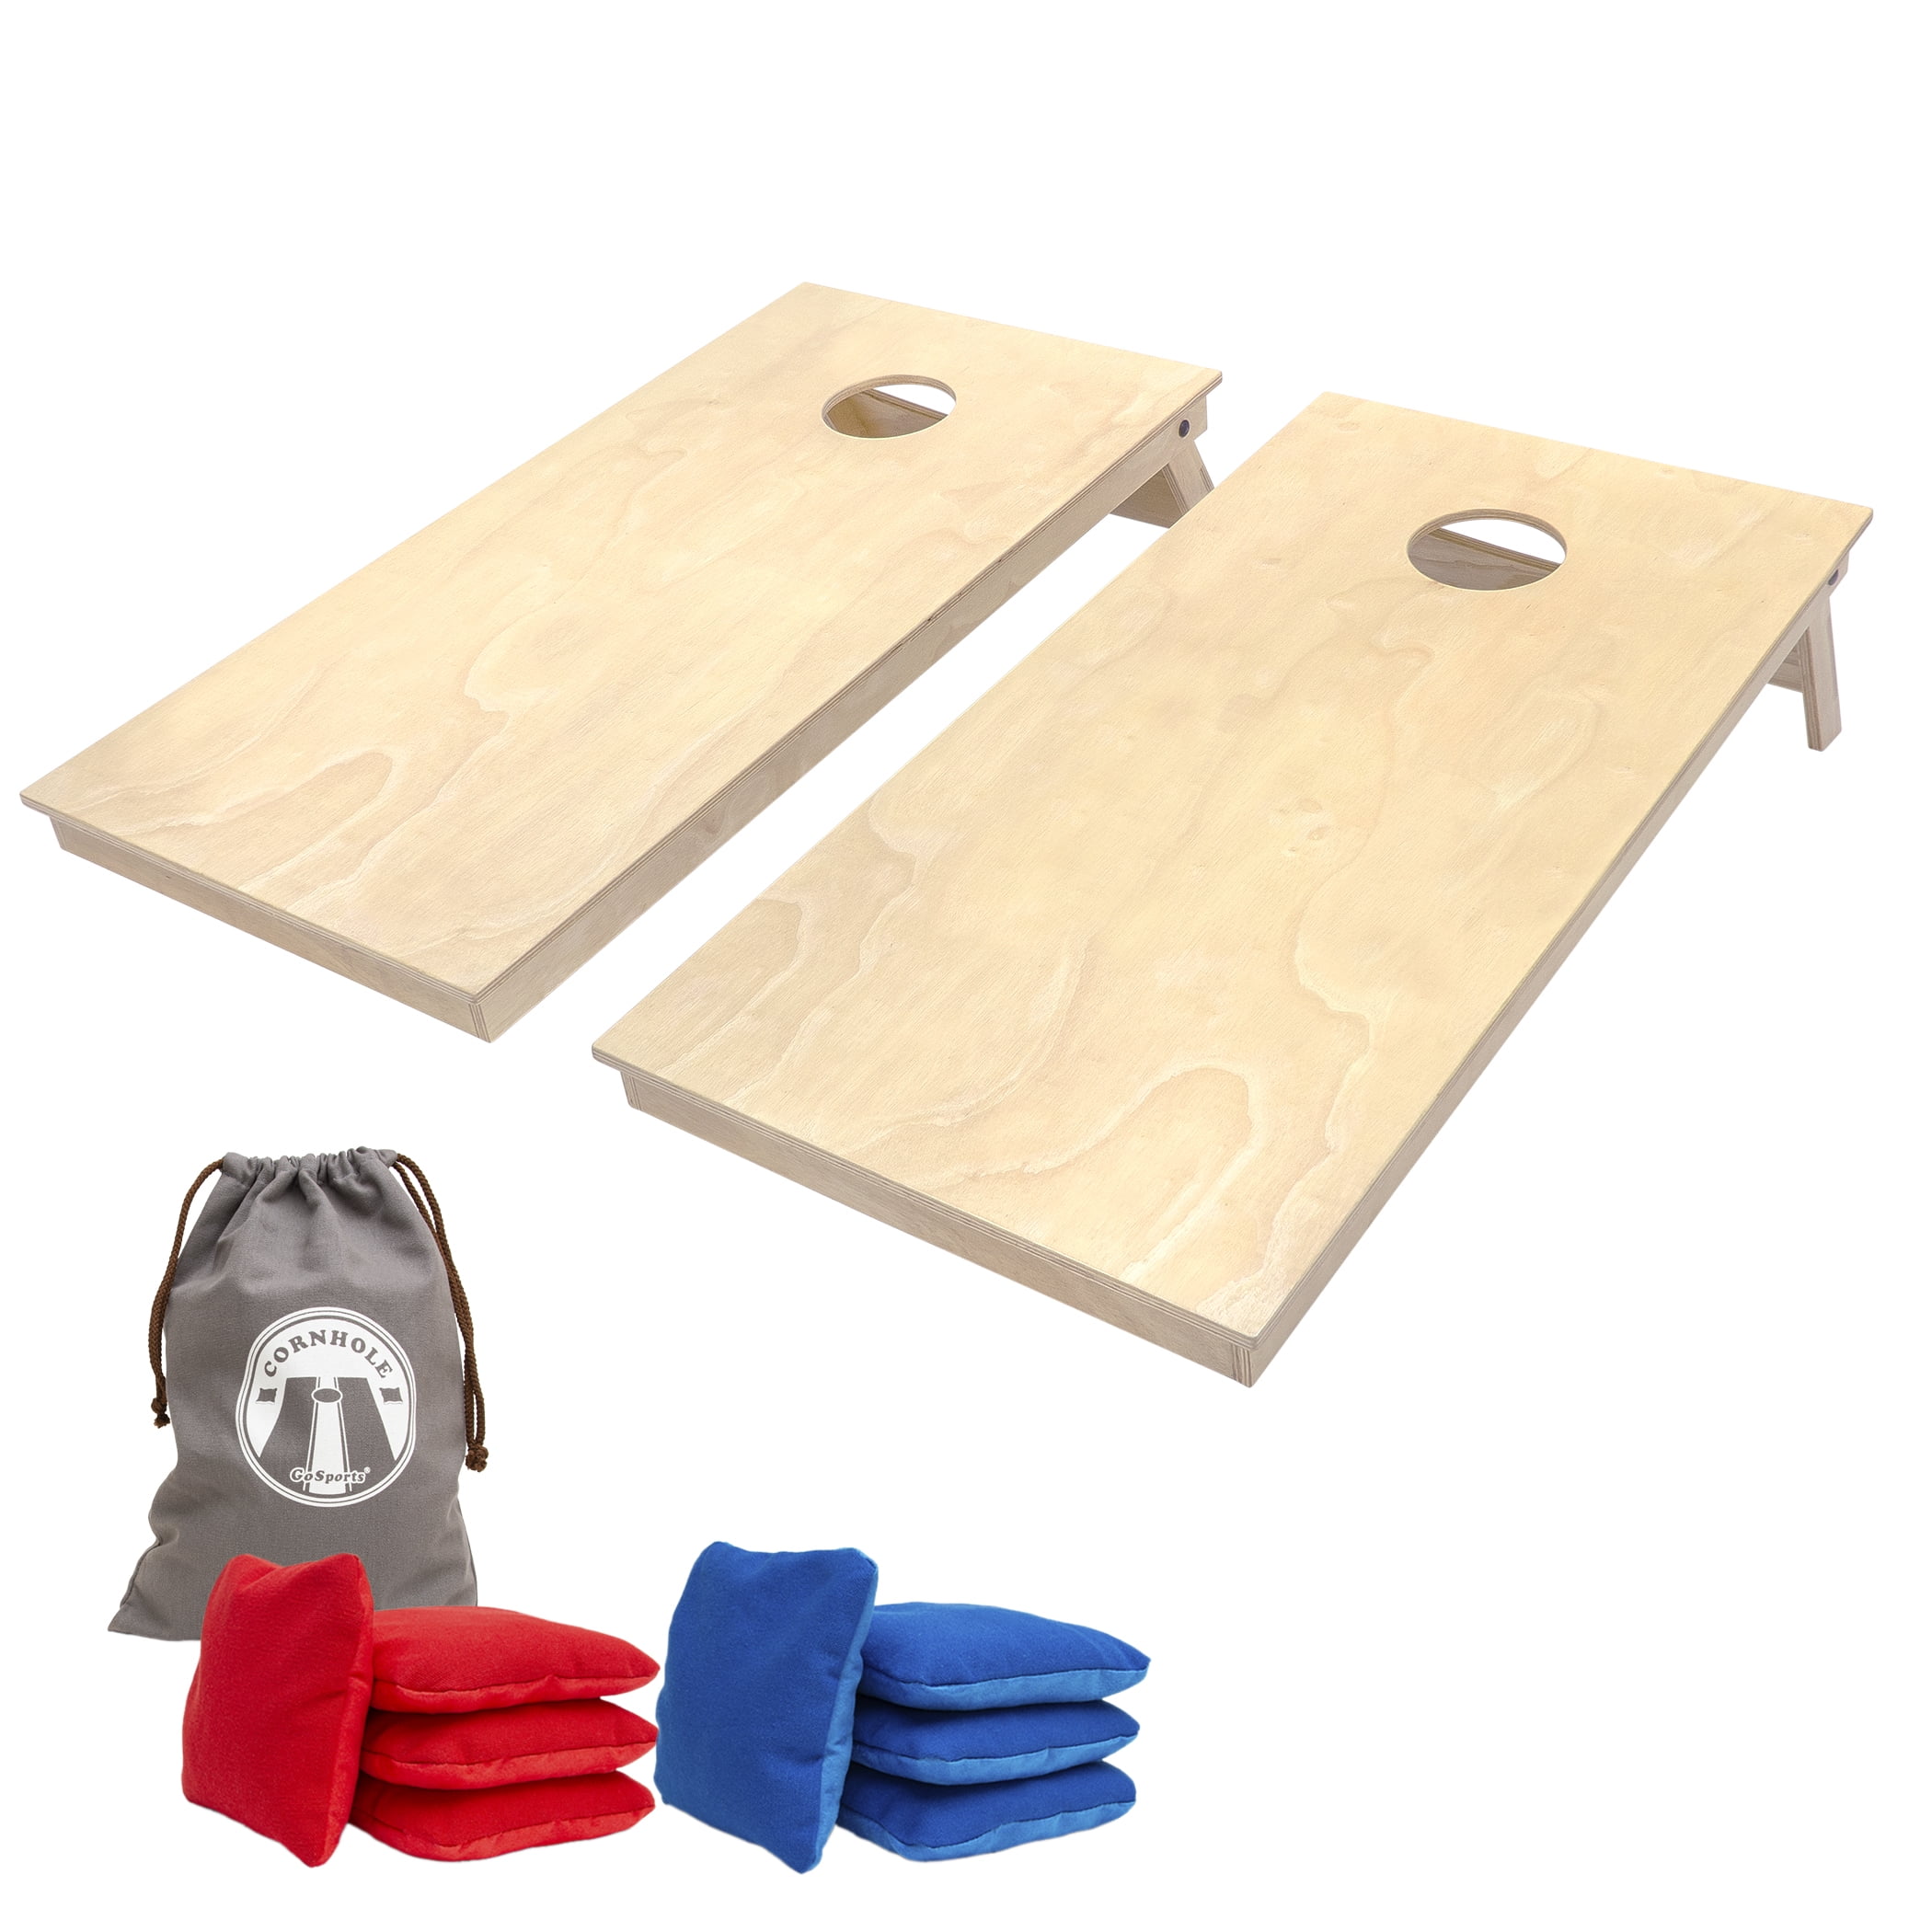 GoSports Tournament Edition Regulation Cornhole Game Set 4? x 2? Wood  Boards with Dual Sided (Slide and Stop) Bean Bags, Natural